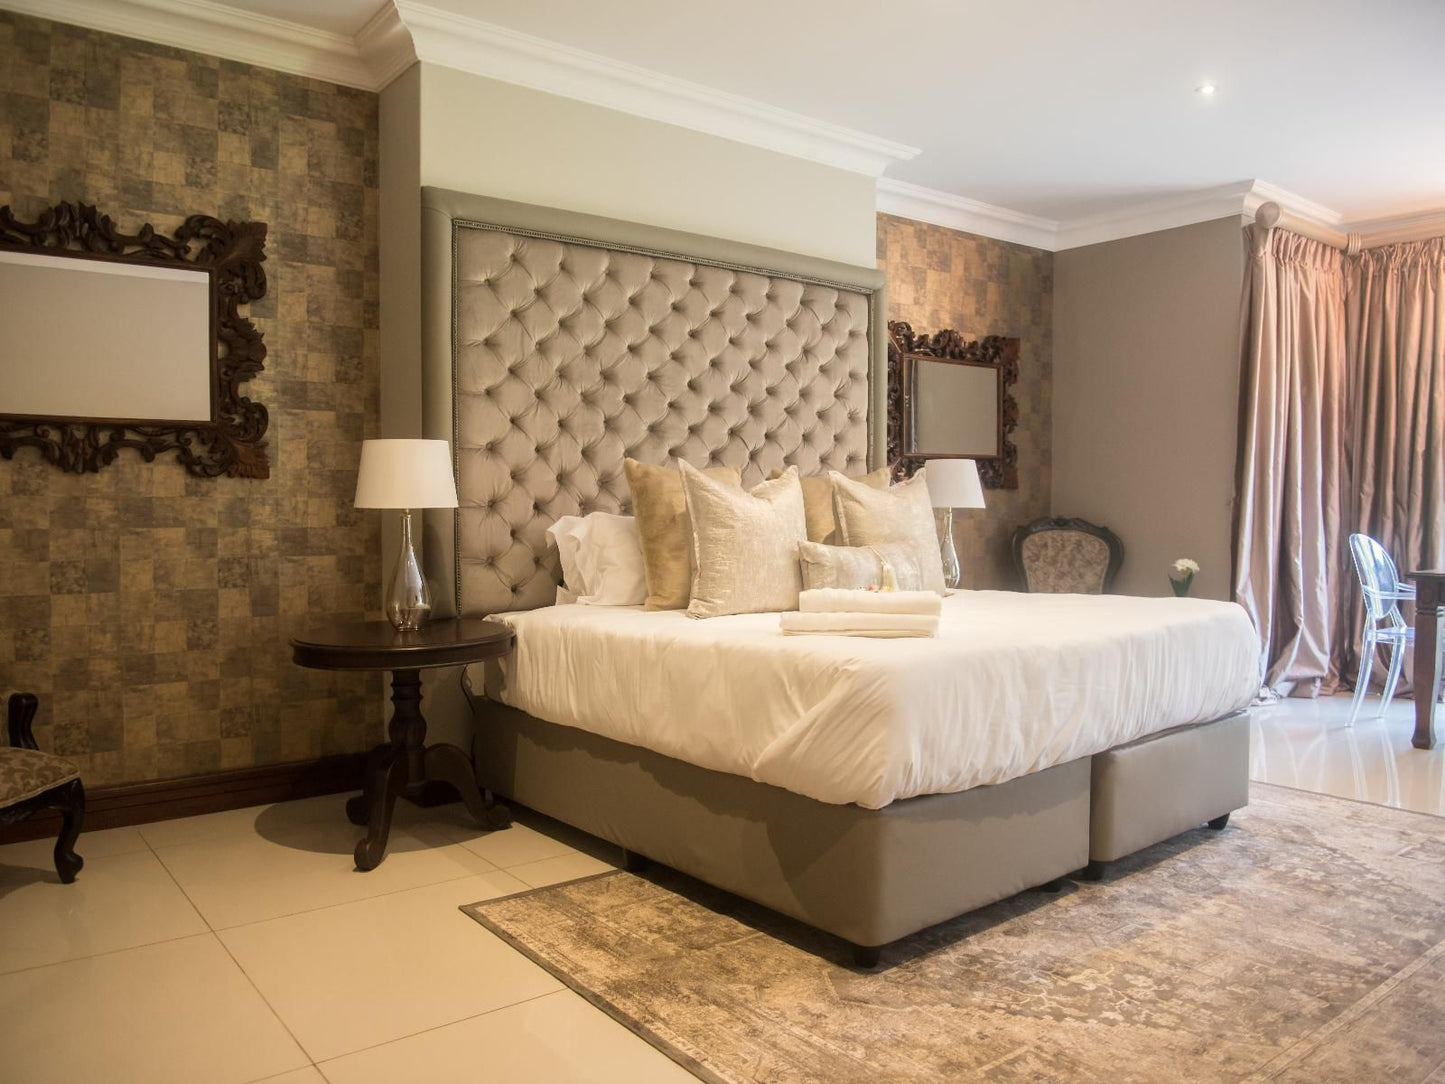 Potch Manor Die Bult Potchefstroom North West Province South Africa Bedroom